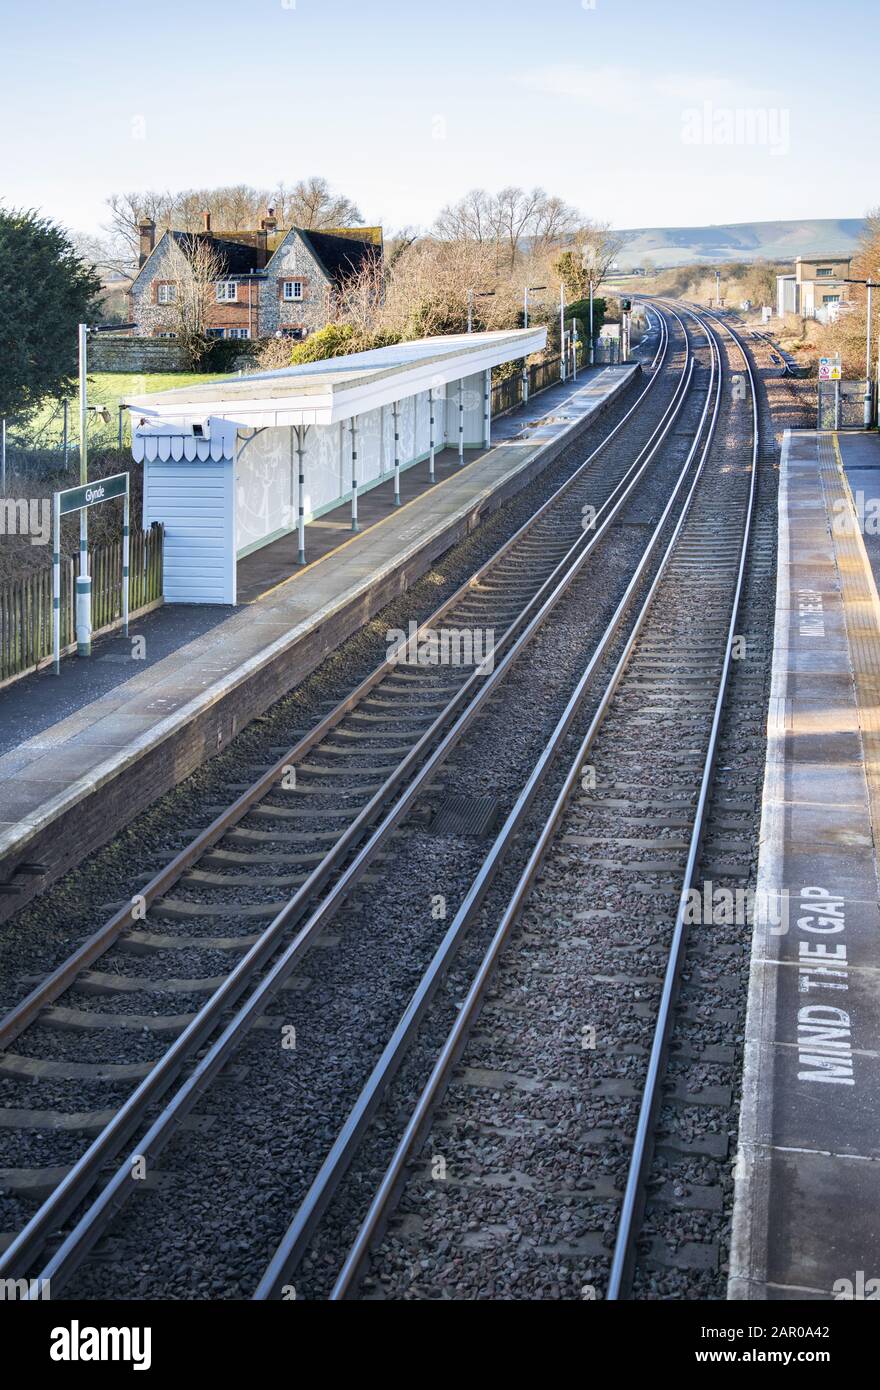 Properties for sale in Glynde Rail Station, East Sussex